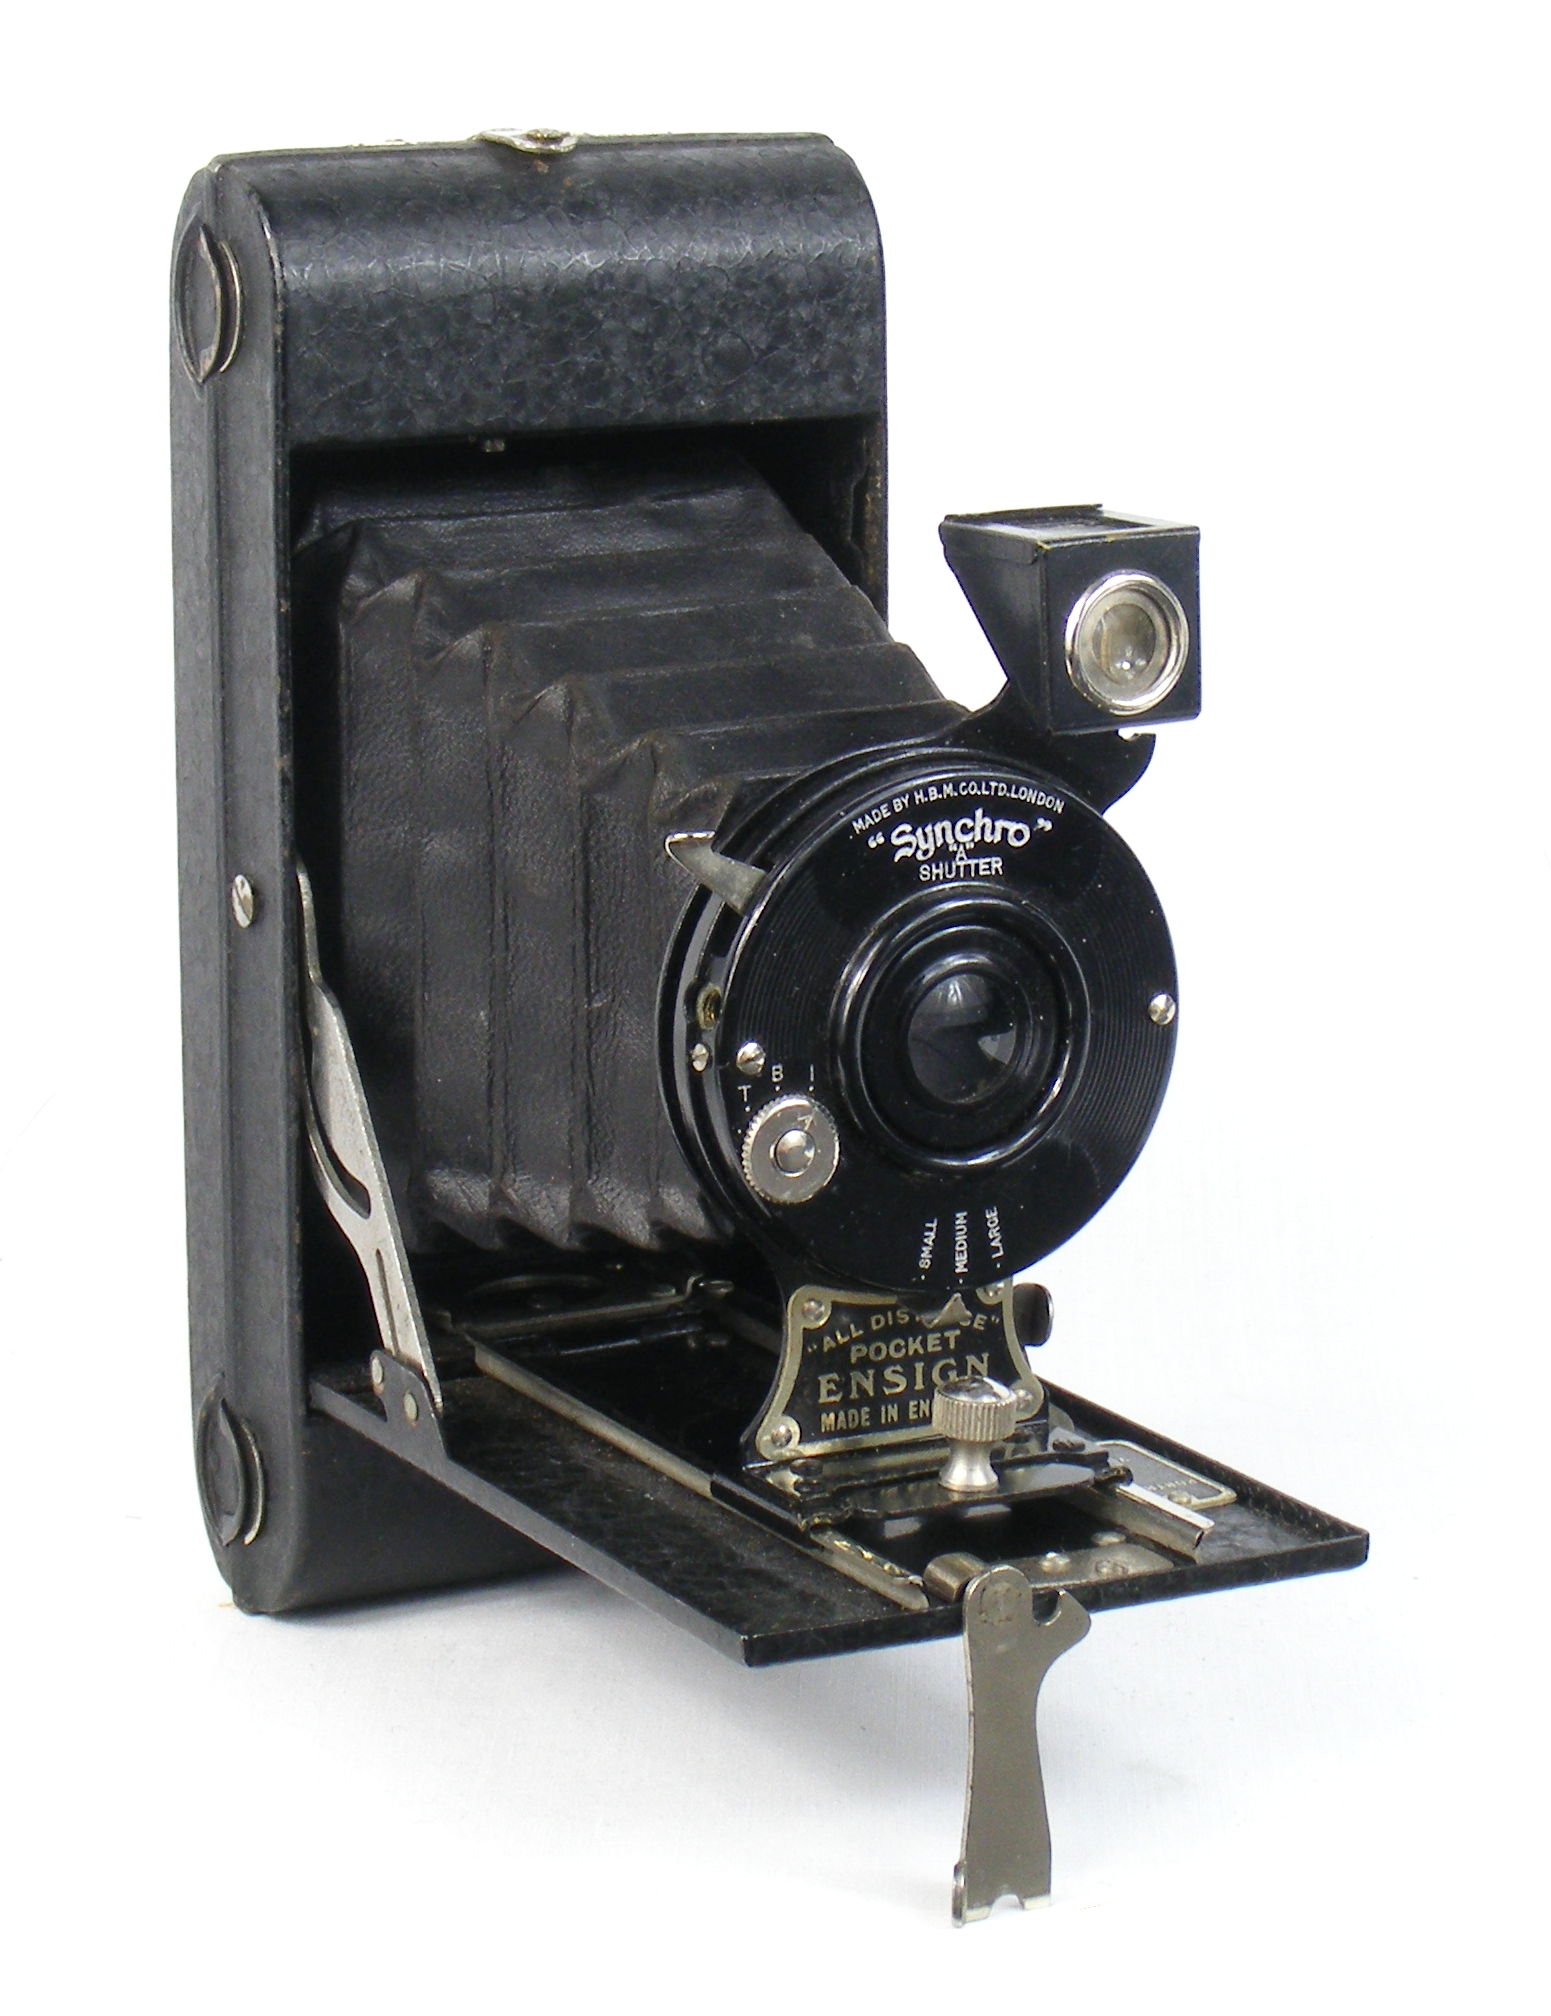 Image of All Distance Pocket Ensign Folding Camera (early model)